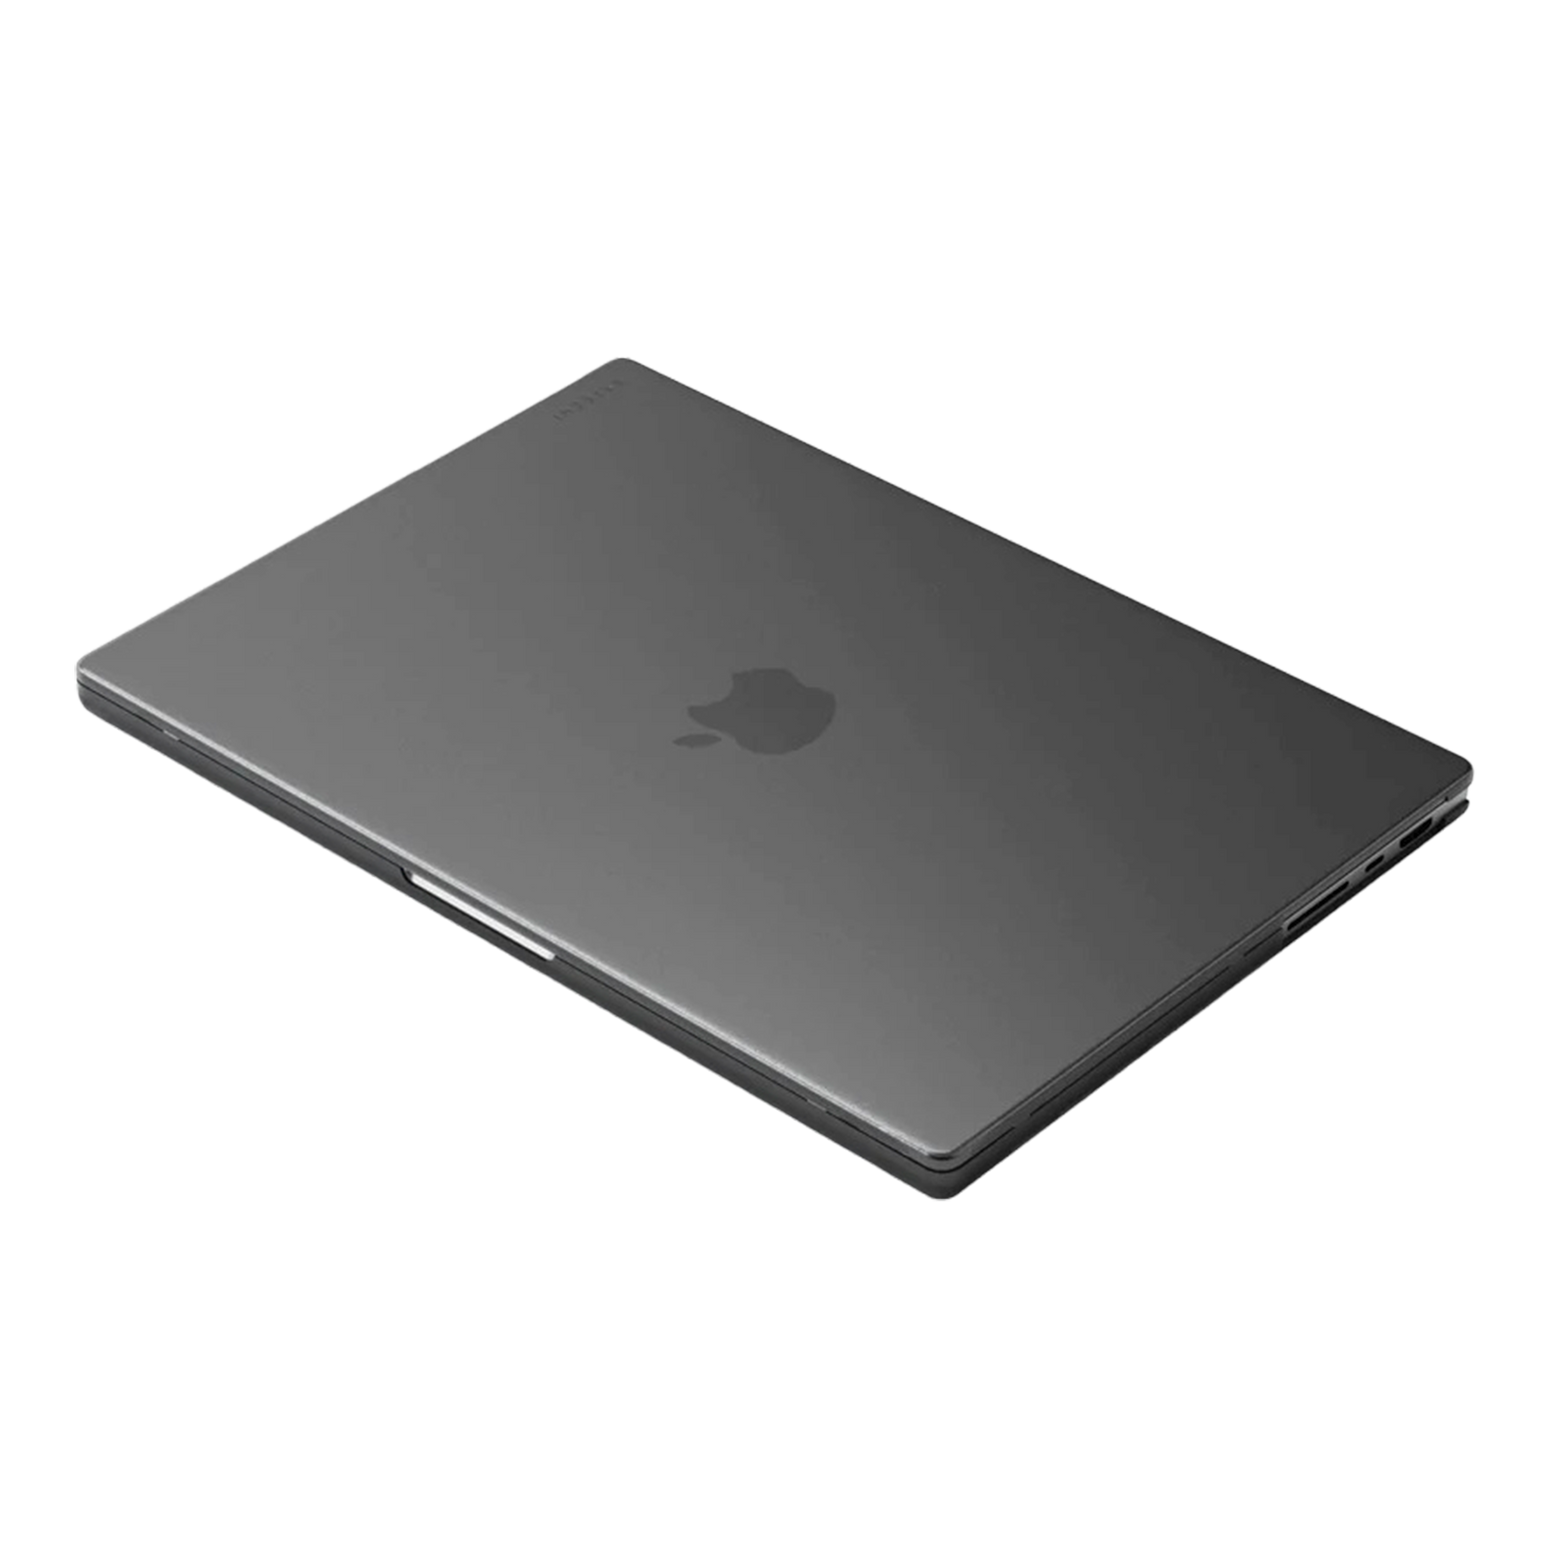 Satechi Eco-Hardshell Case for MacBook Pro 16 inch - Space Grey